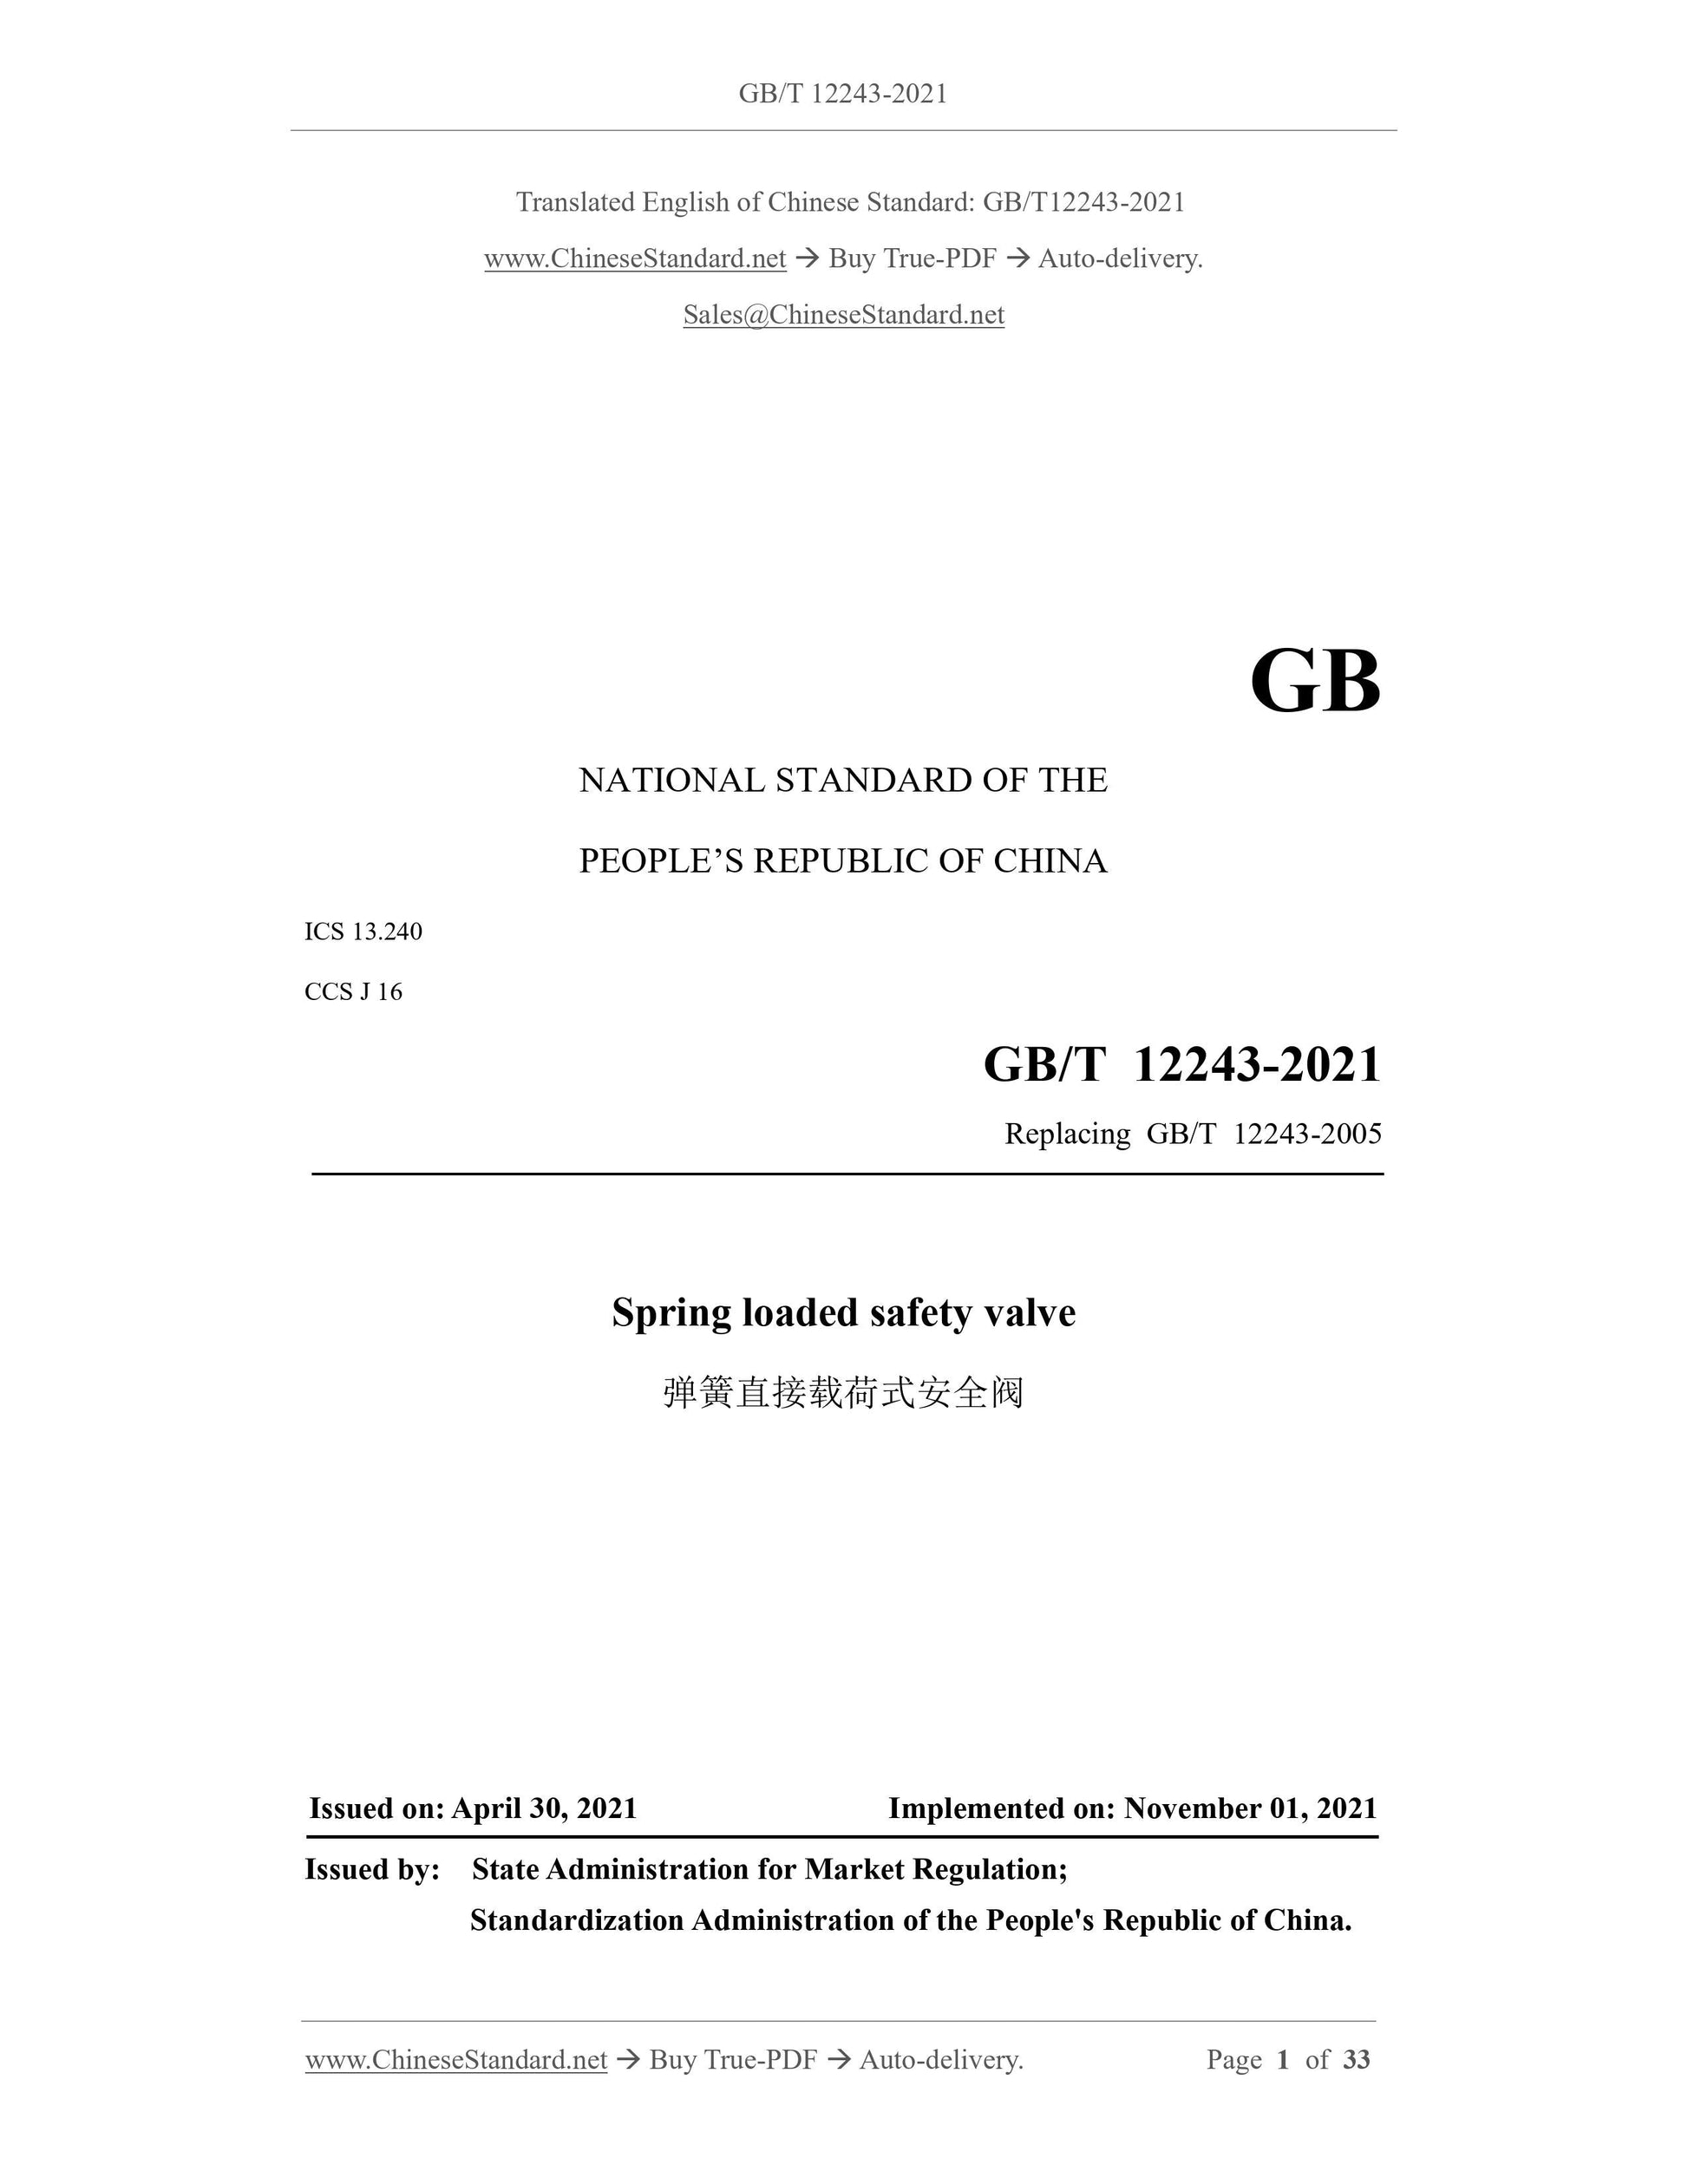 GB/T 12243-2021 Page 1